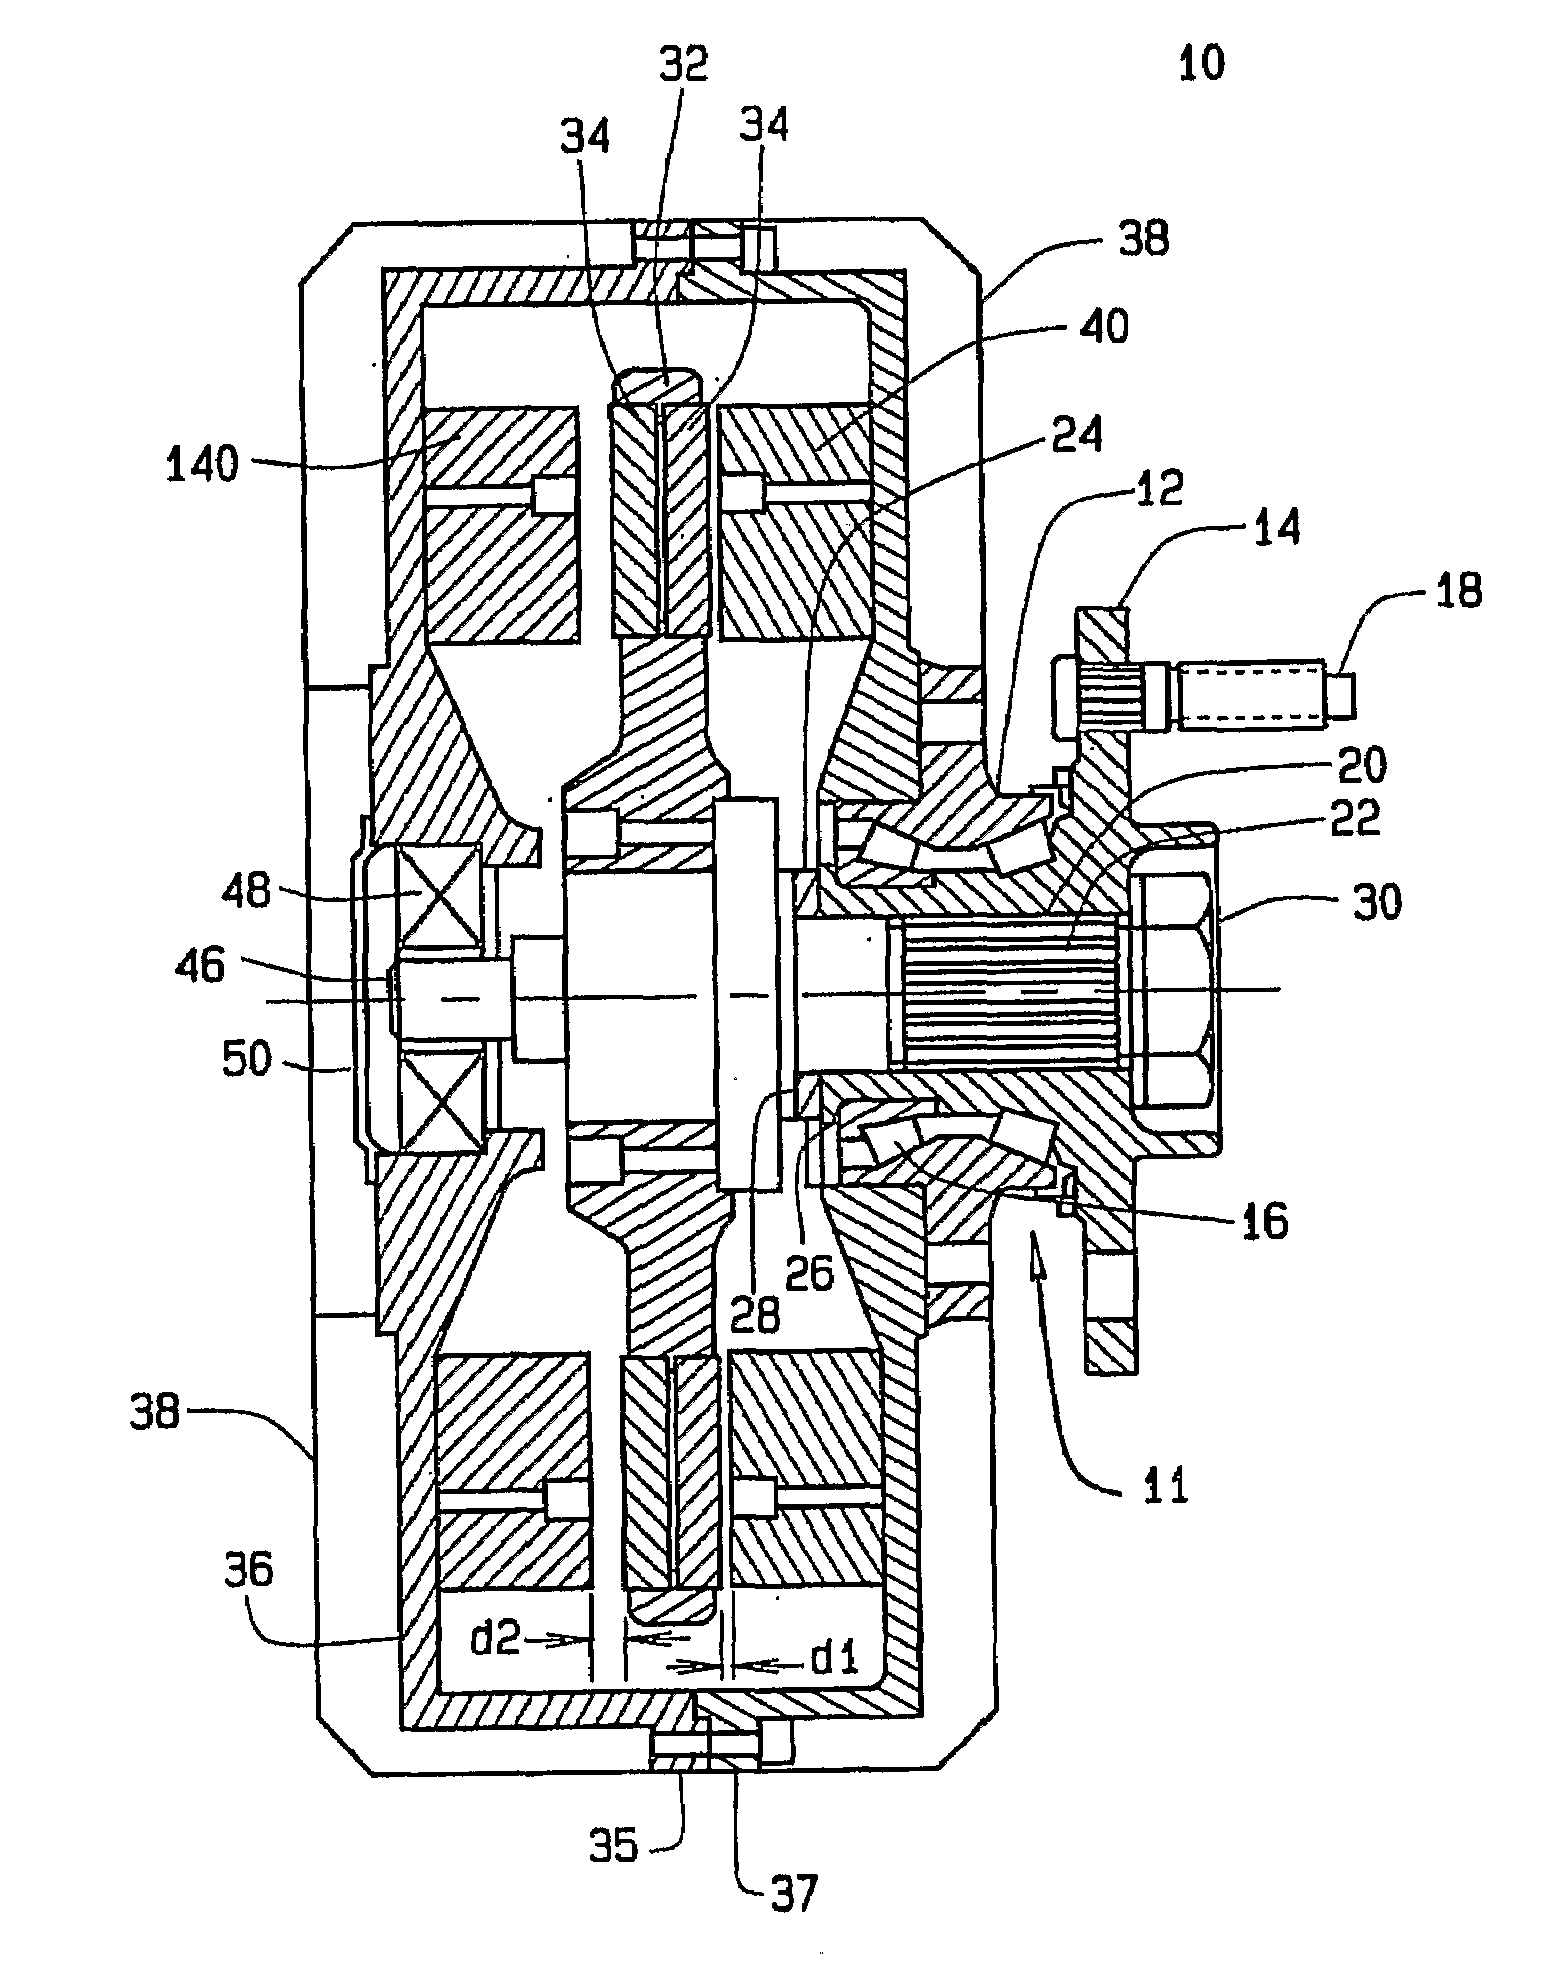 Virtual Moving Air Gap For An Axial Flux Permanent Magnet Motor With Dual Stators